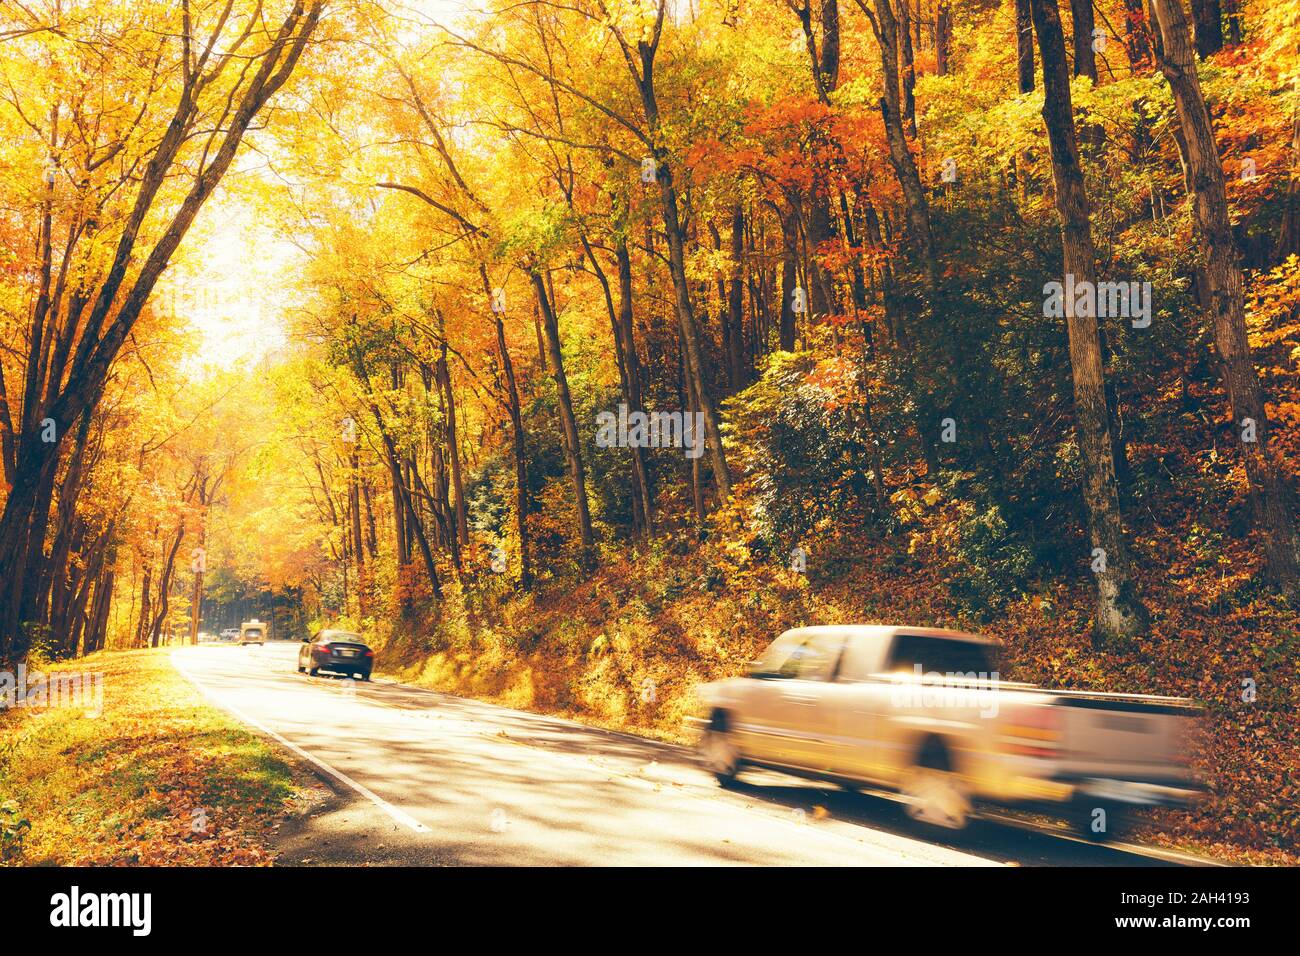 USA, Tennessee, Cars driving along road through autumn forest in Great Smoky Mountains Stock Photo